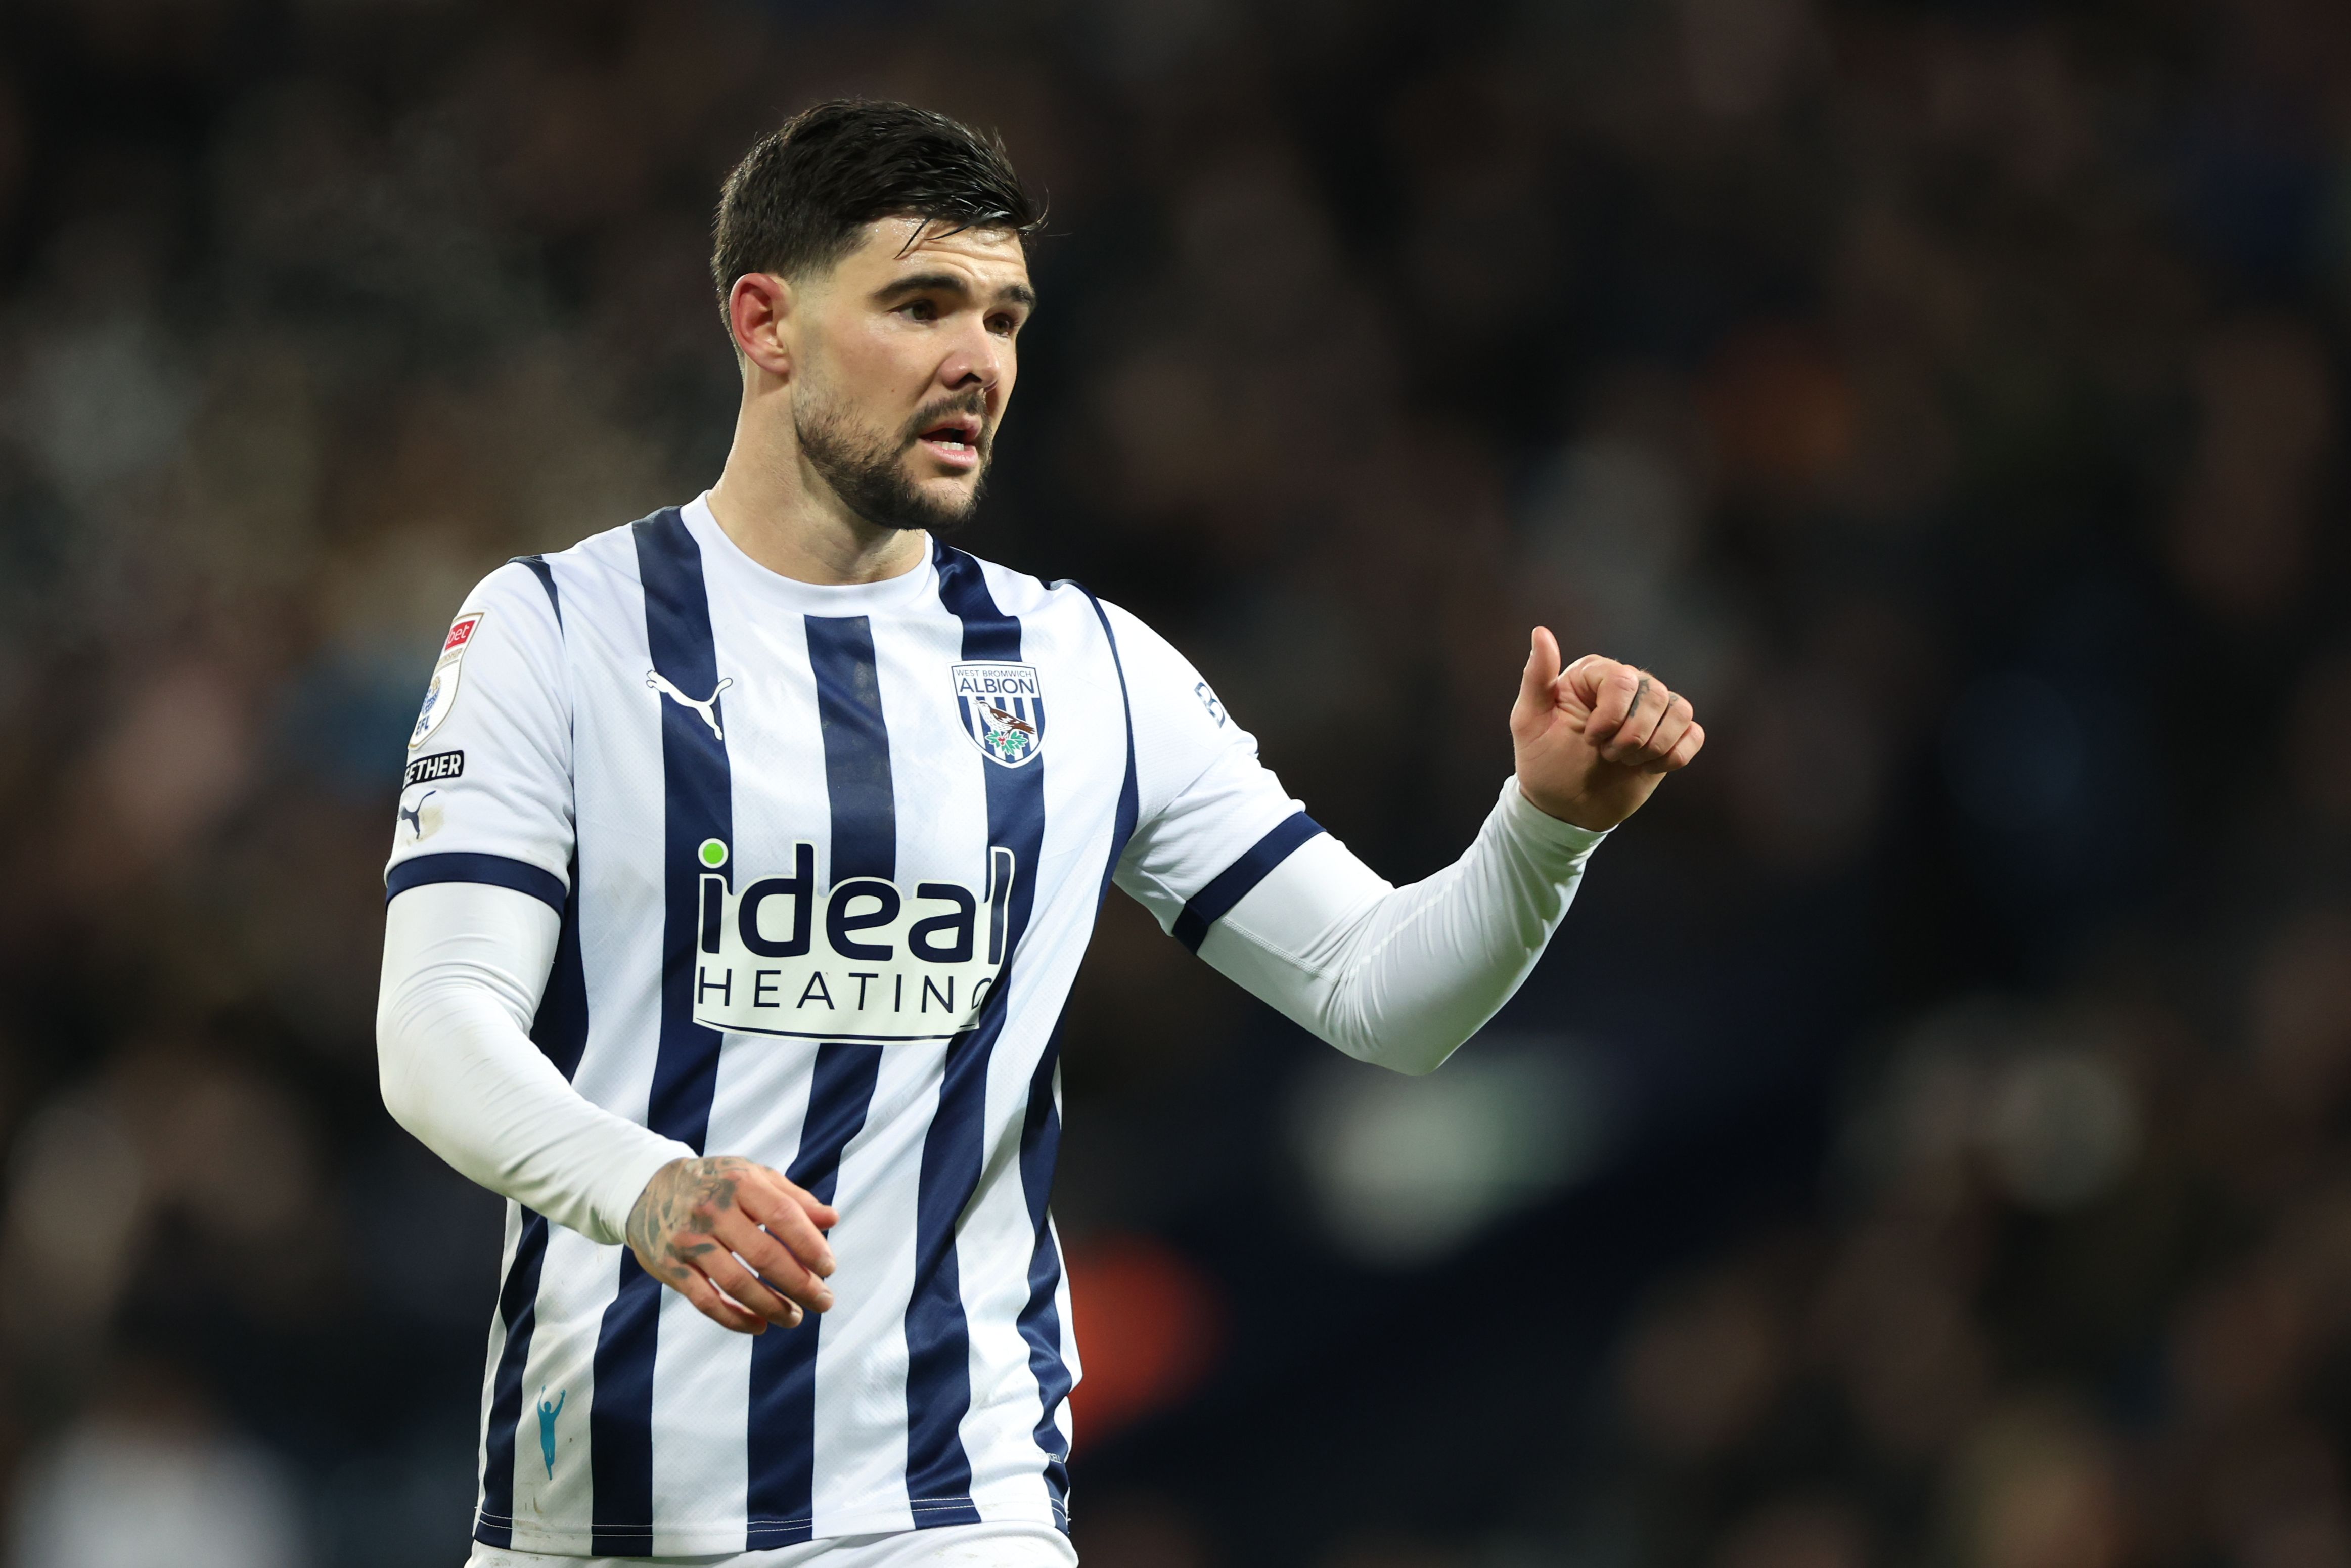 Alex Mowatt with his thumb up during an Albion game wearing the home kit 